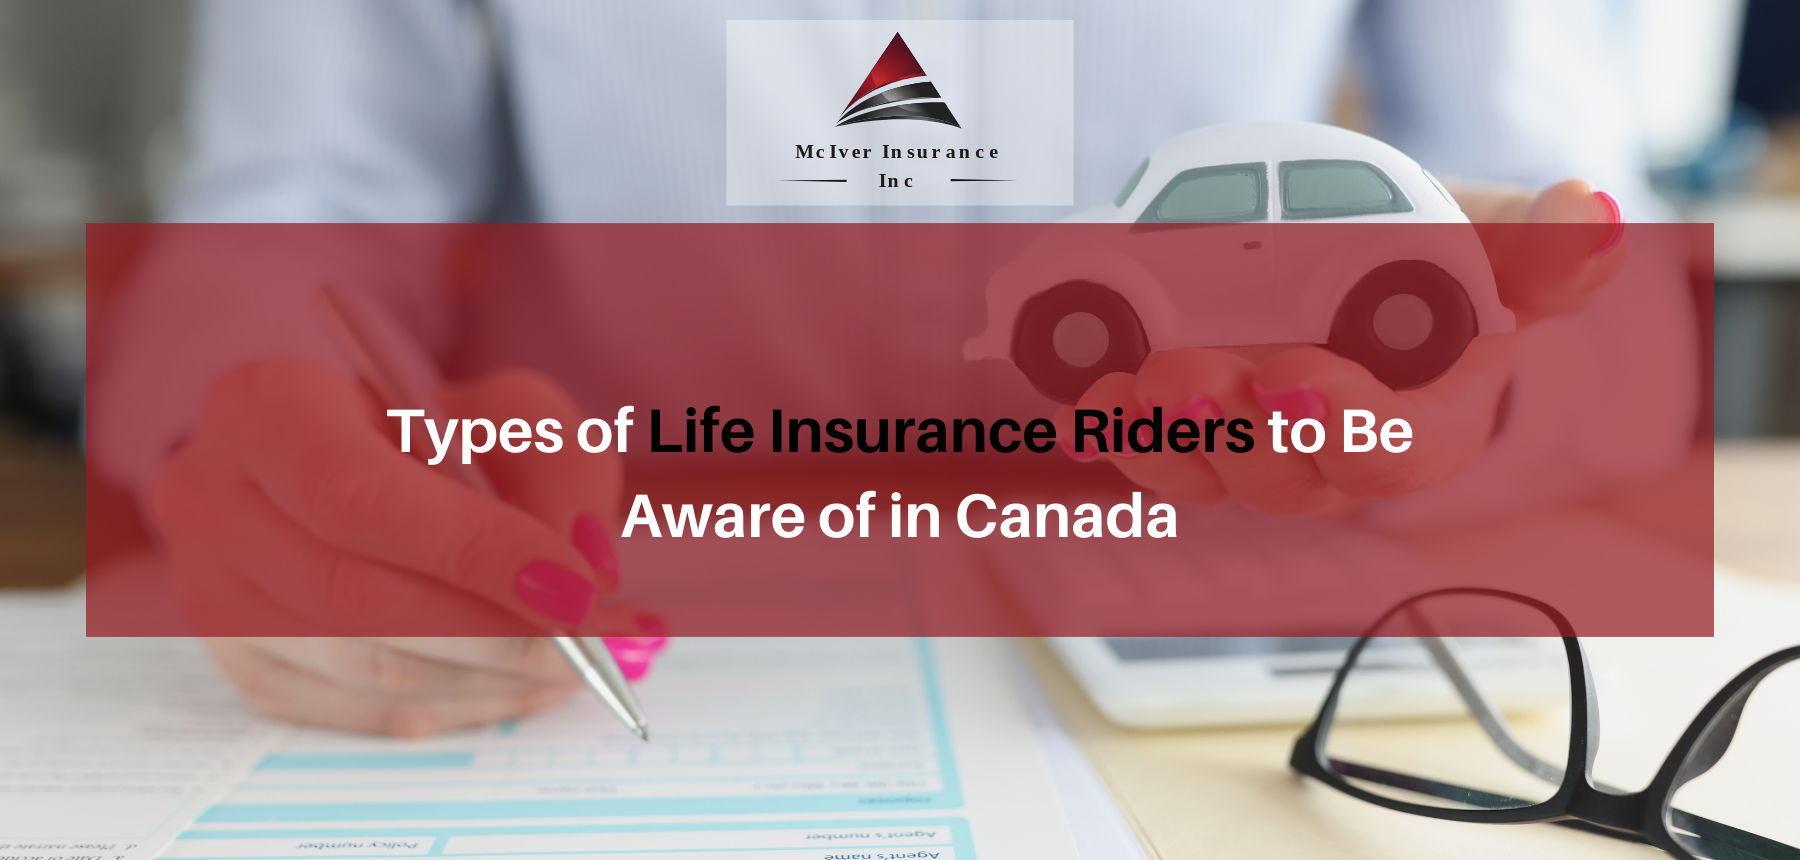 Types of Life Insurance Riders to Be Aware of in Canada